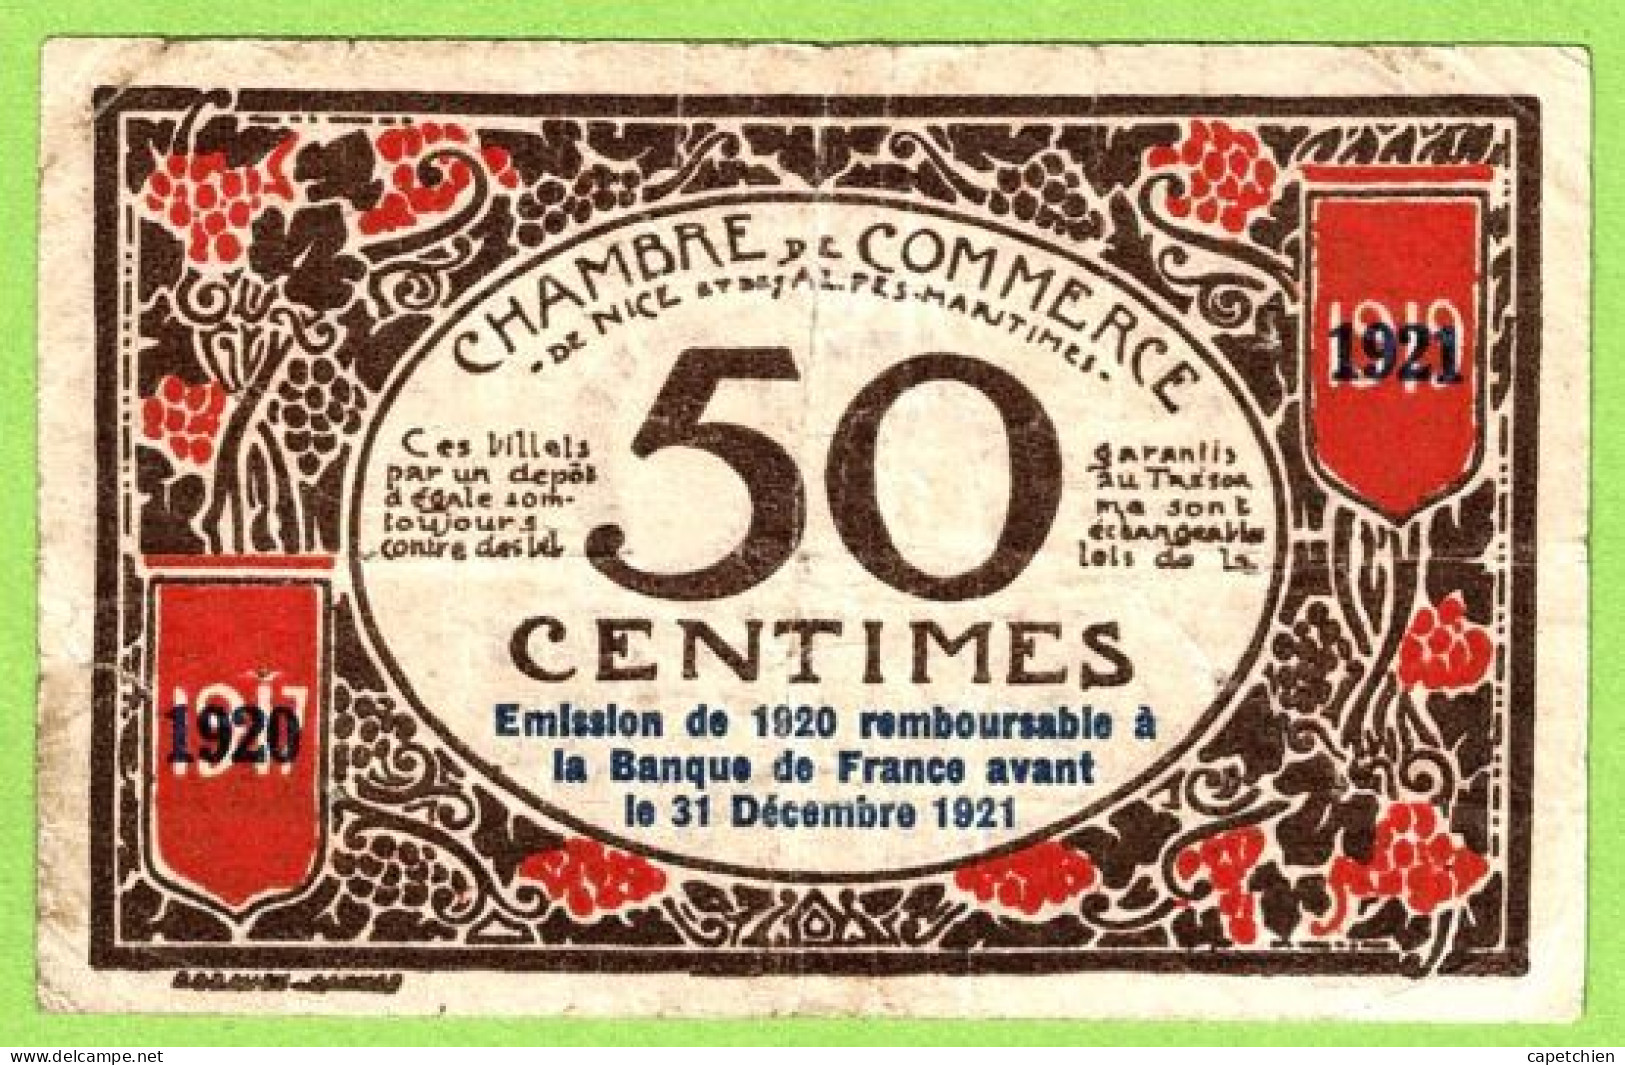 FRANCE / CHAMBRE De COMMERCE / NICE - ALPES MARITIMES / 50 CENTIMES / 1917 - 1921 SURCHARGE 1920 - 1921 / N° 17466 - Chamber Of Commerce